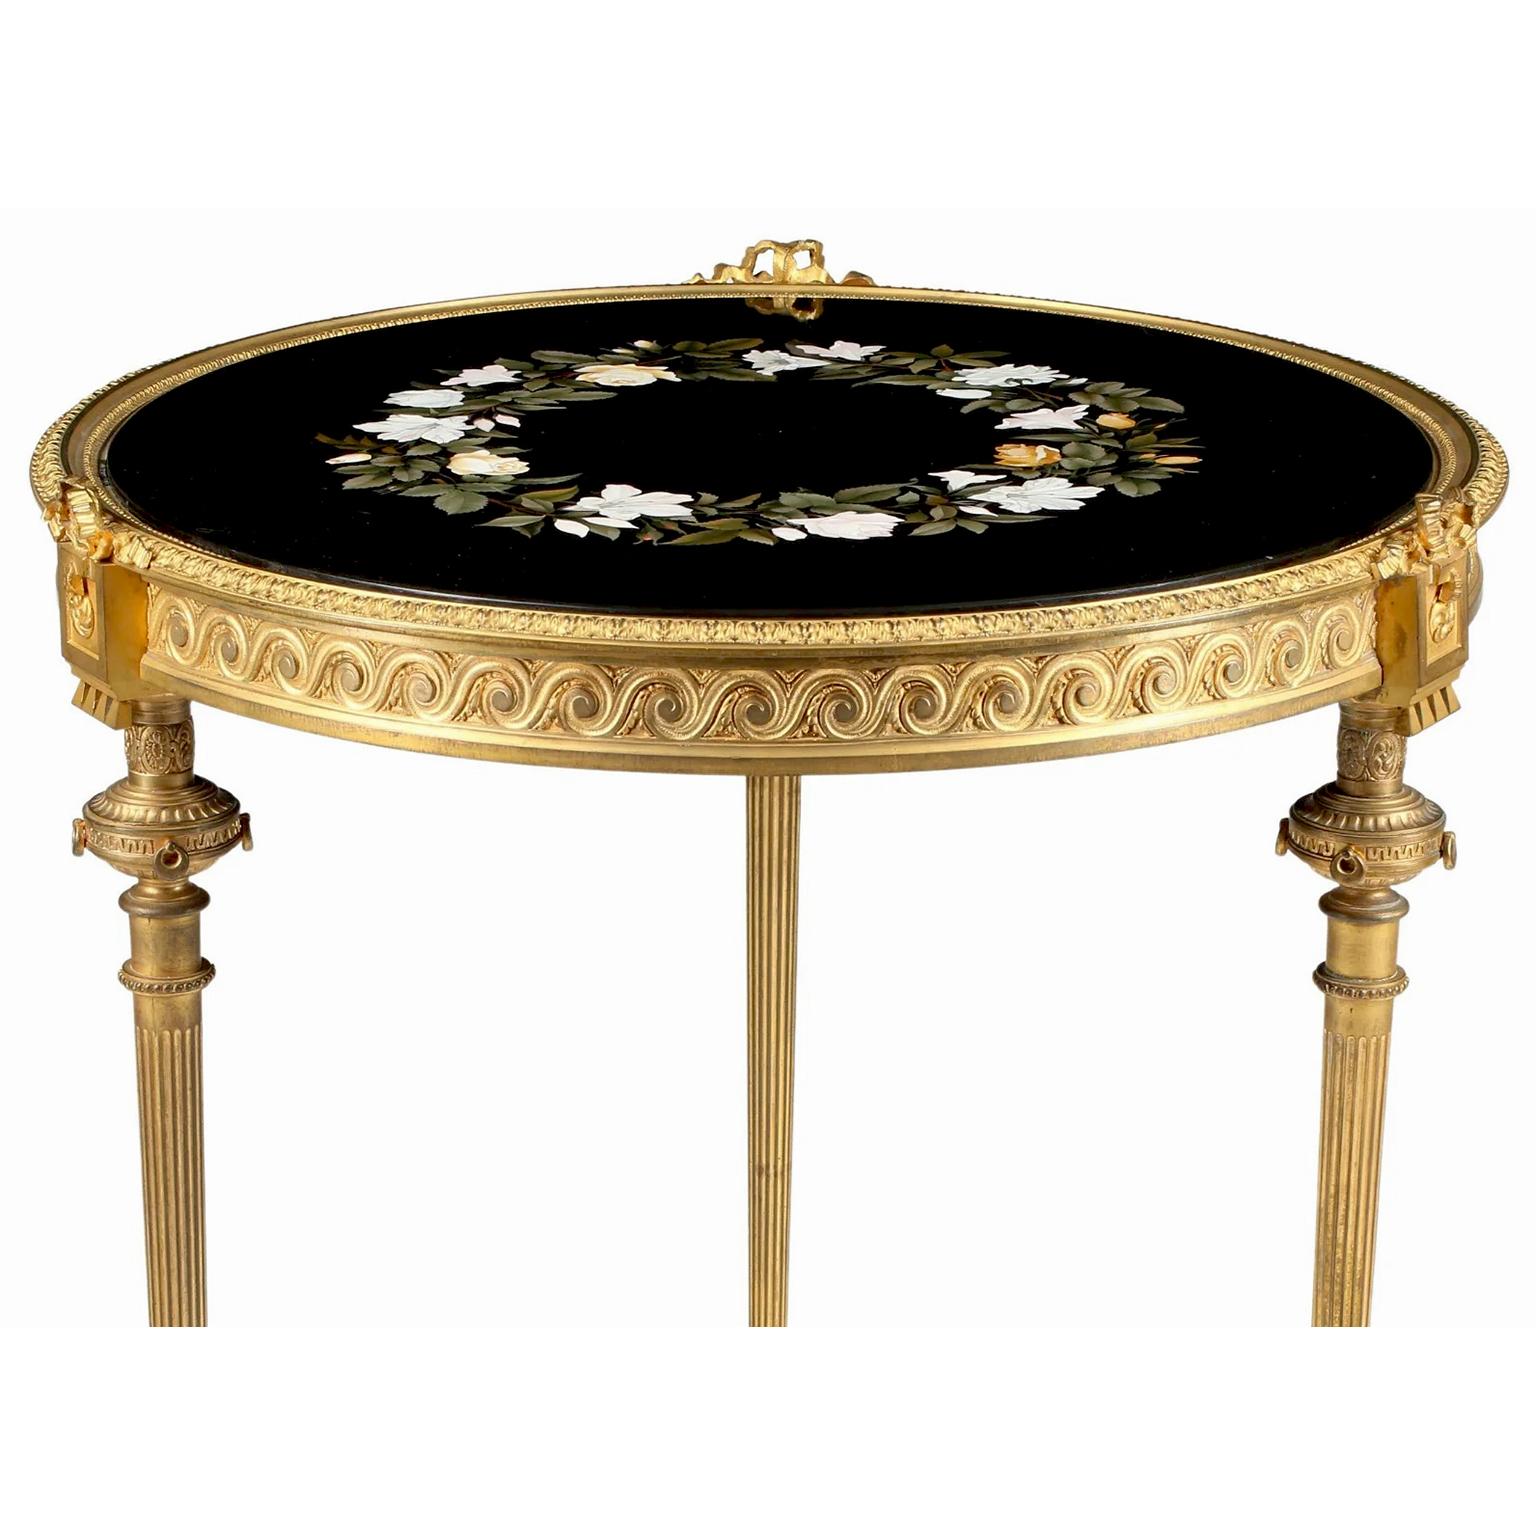 A Very fine Franco-Italian 19th century neoclassical Revival style gilt-bronze and Pietra Dura (or Pietra-Dure) occasional side-table Gueridon. The circular gilt-bronze frame raised on three fluted legs conjoined at the base, topped with Greco-Roman